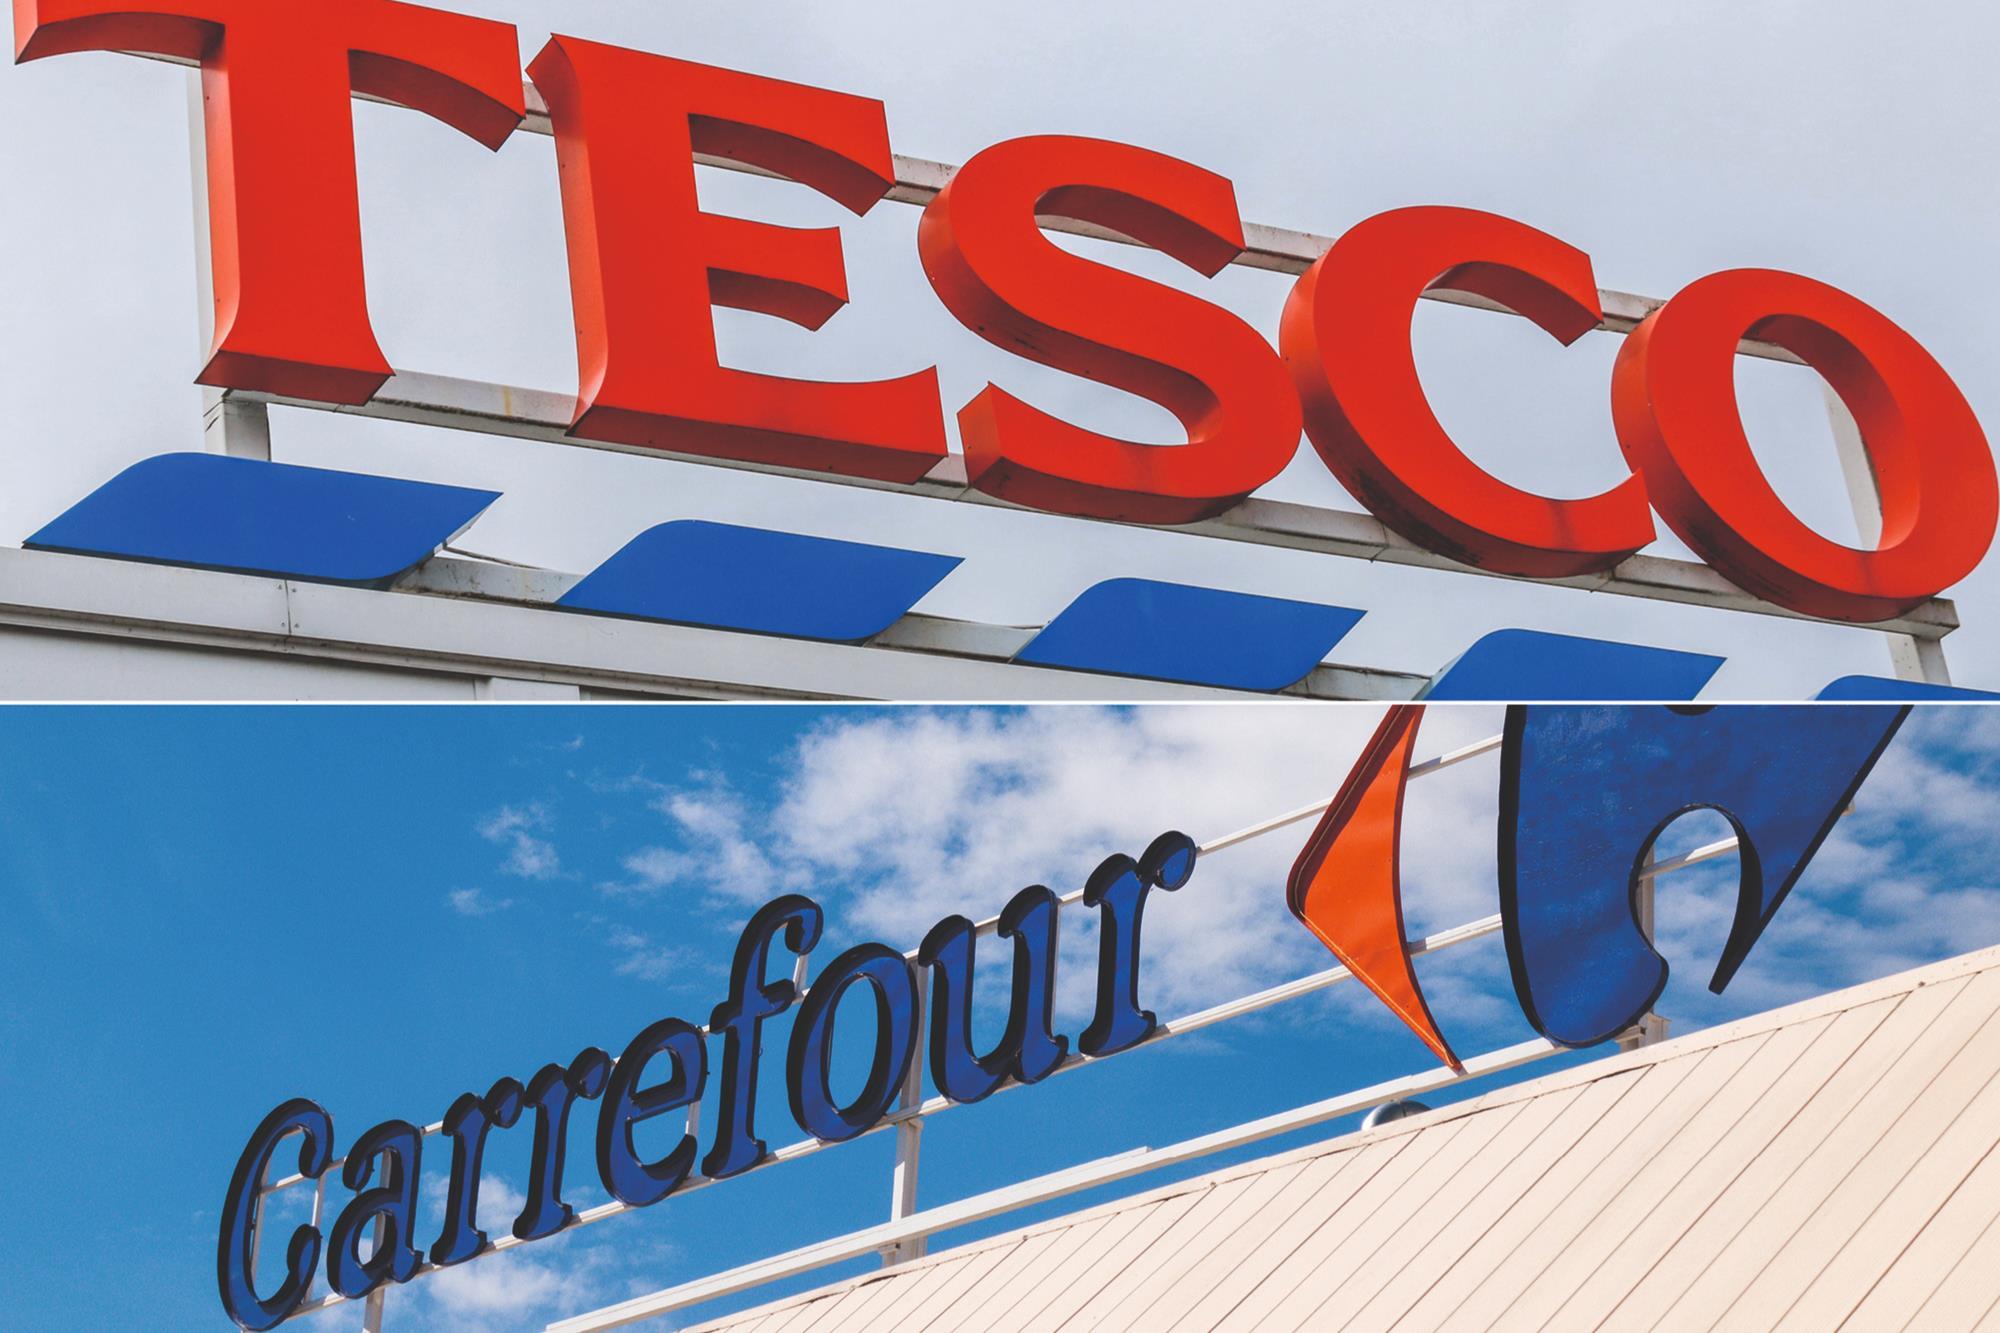 Tesco and Carrefour plan 'strategic alliance' to buy products